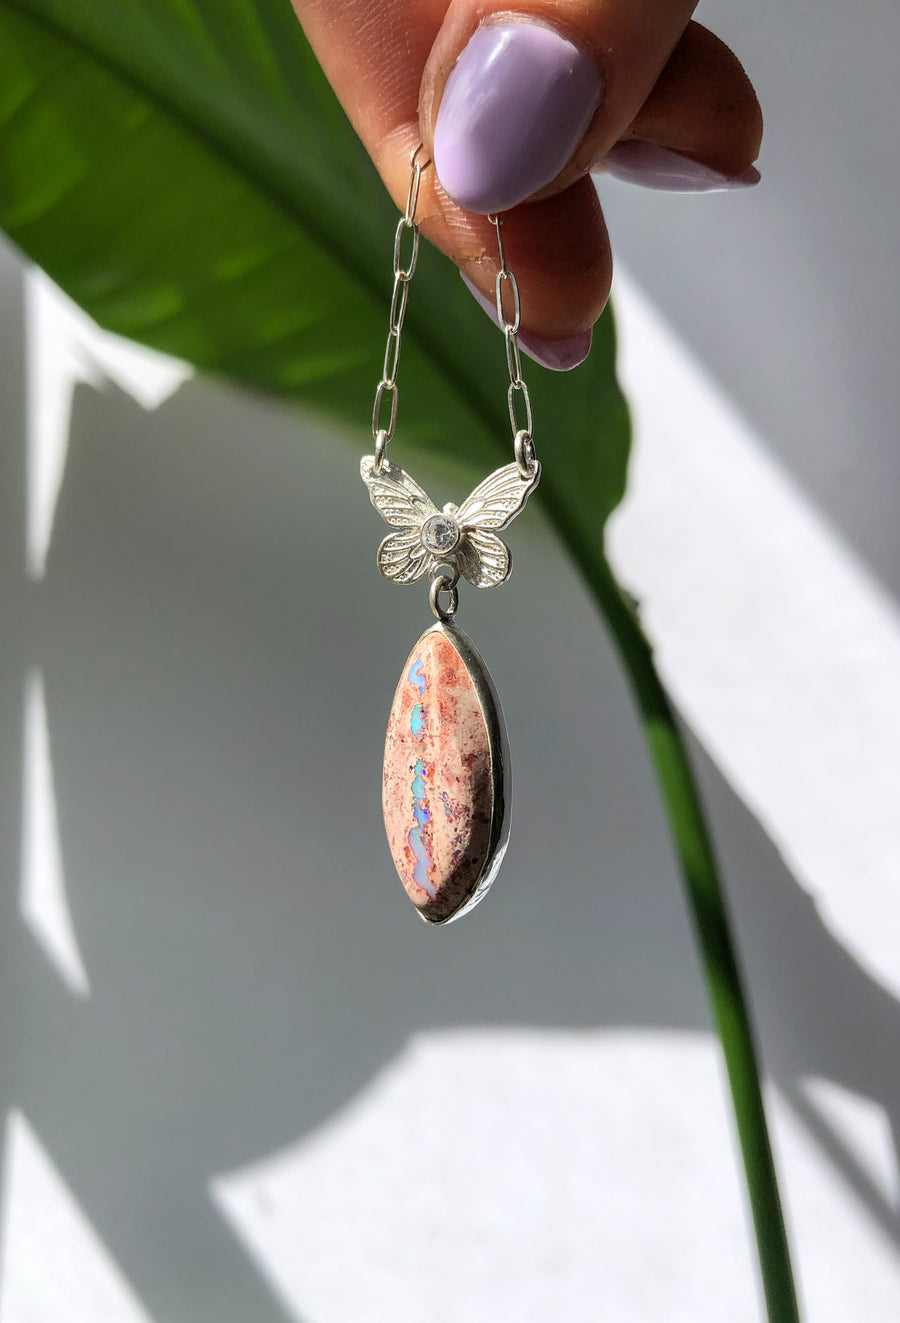 MARIPOSA Necklace // Mexican Fire Opal